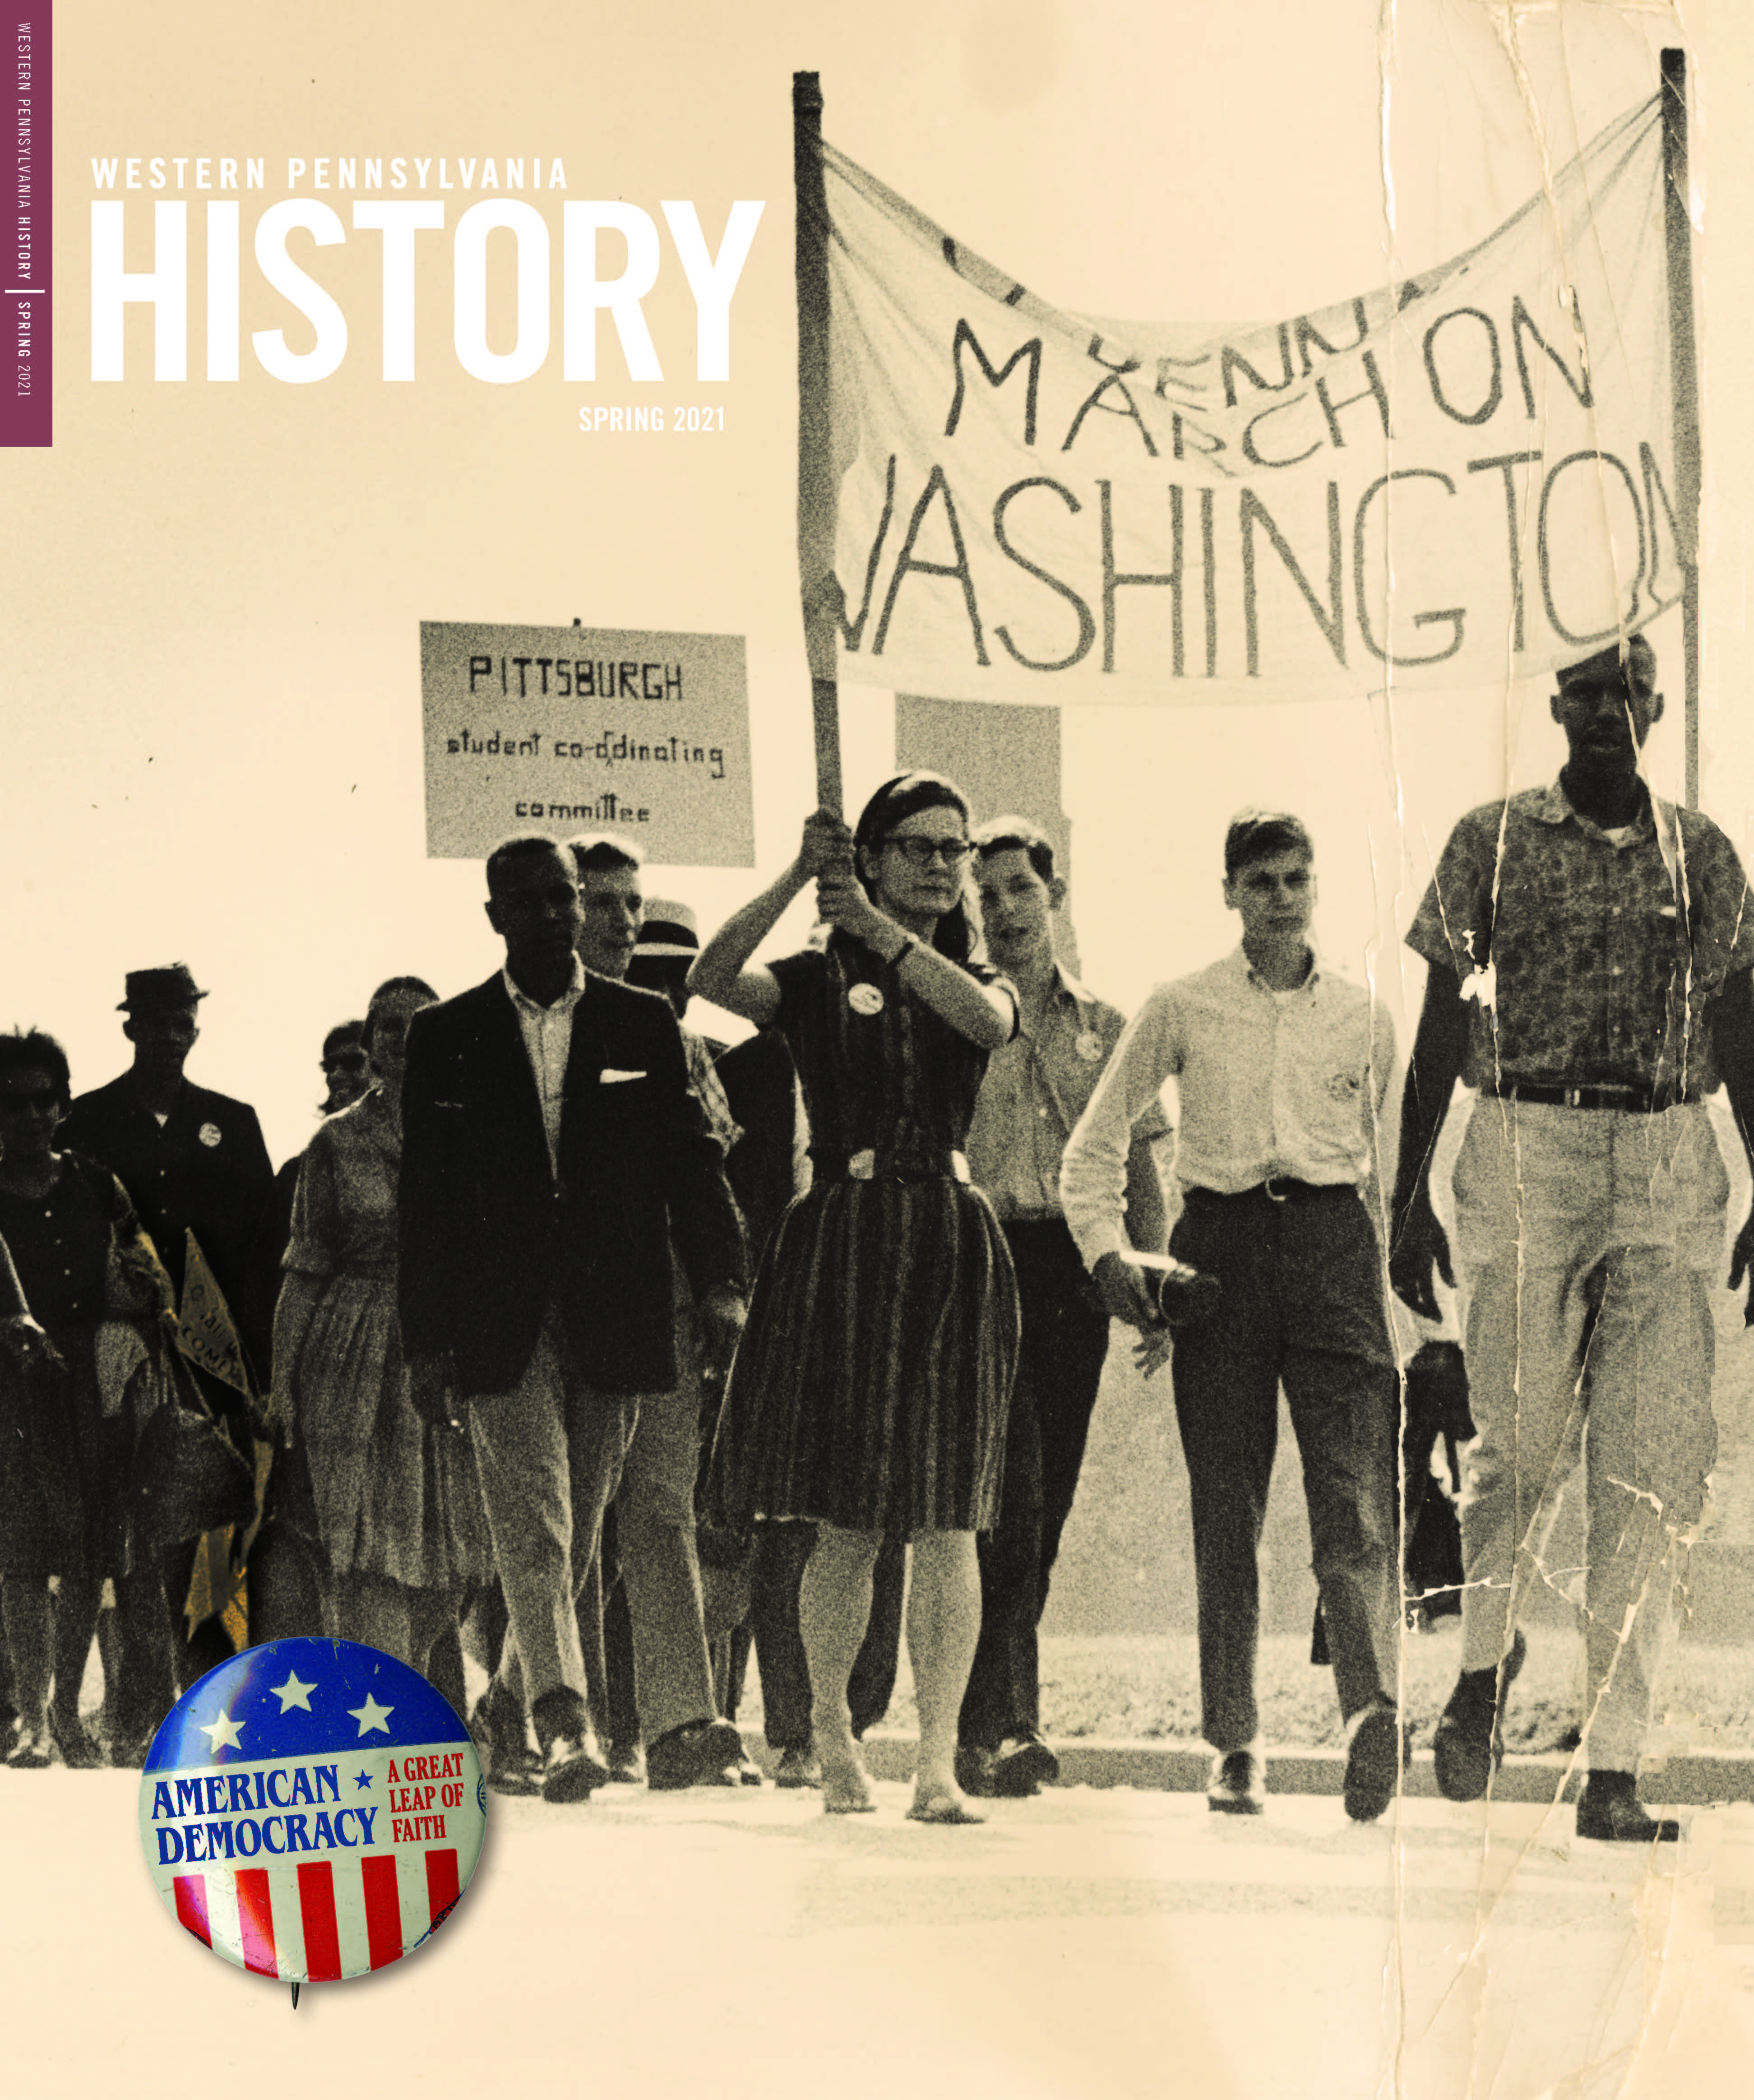 Magazine cover with sepia photo of people marching with a banner reading "MARCH ON WASHINGTON".